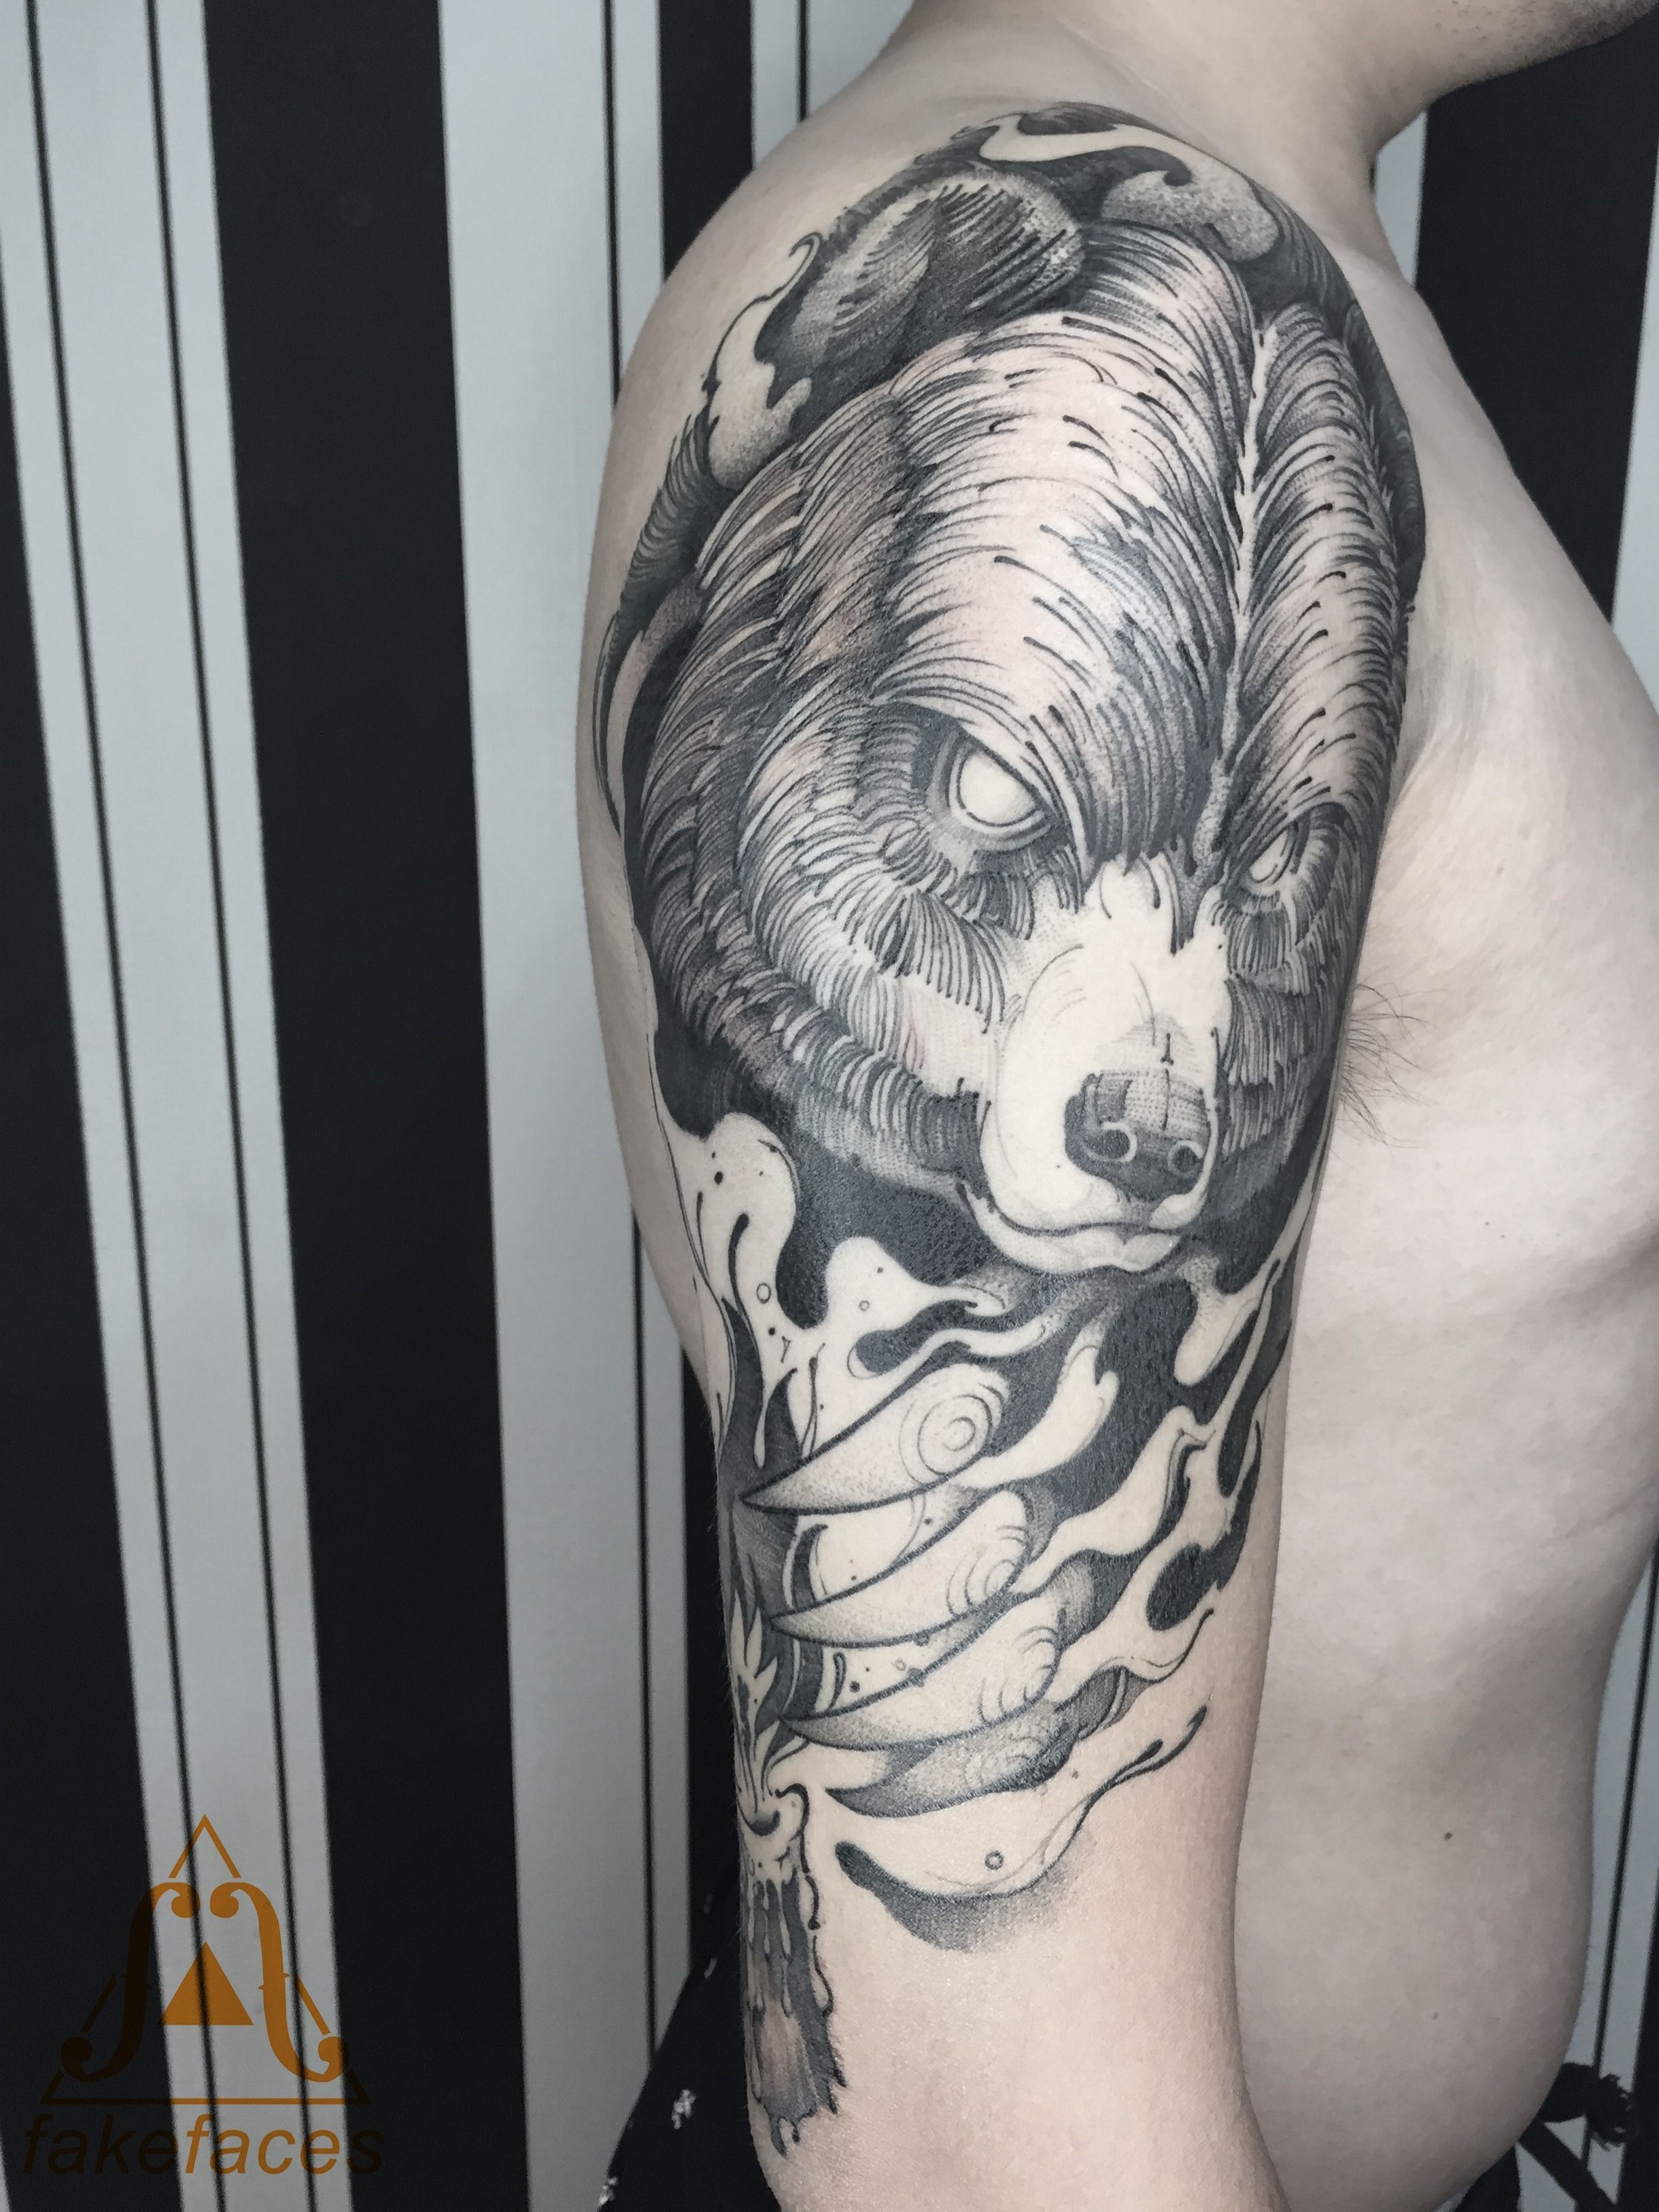 Turned up in one of those top 40 bear tattoos for men compilations   rshittytattoos